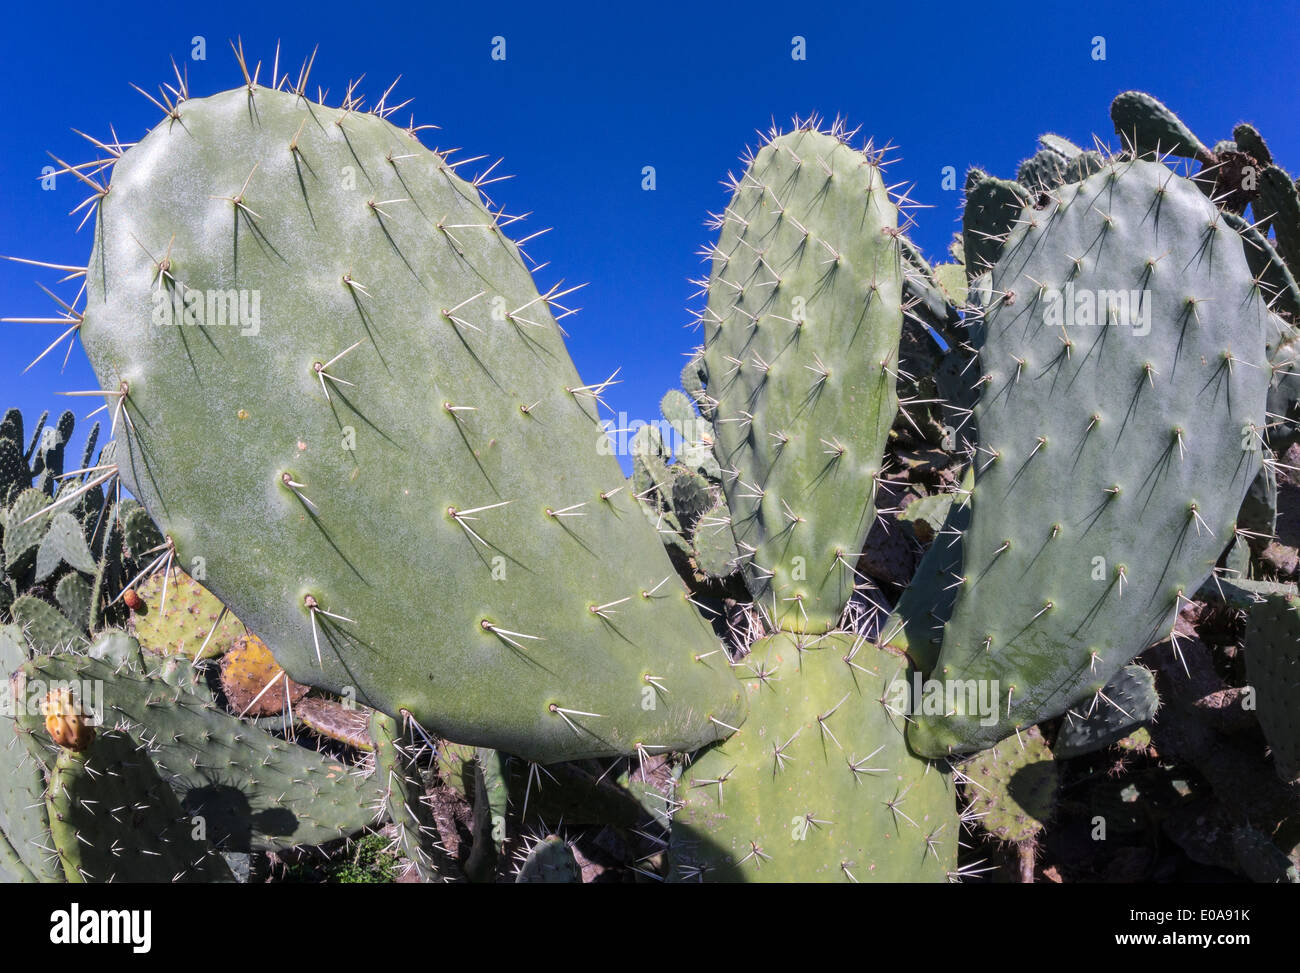 Close up of a prickly pear cactus, Opuntia ficus-indica, showing its pads and spines. Stock Photo